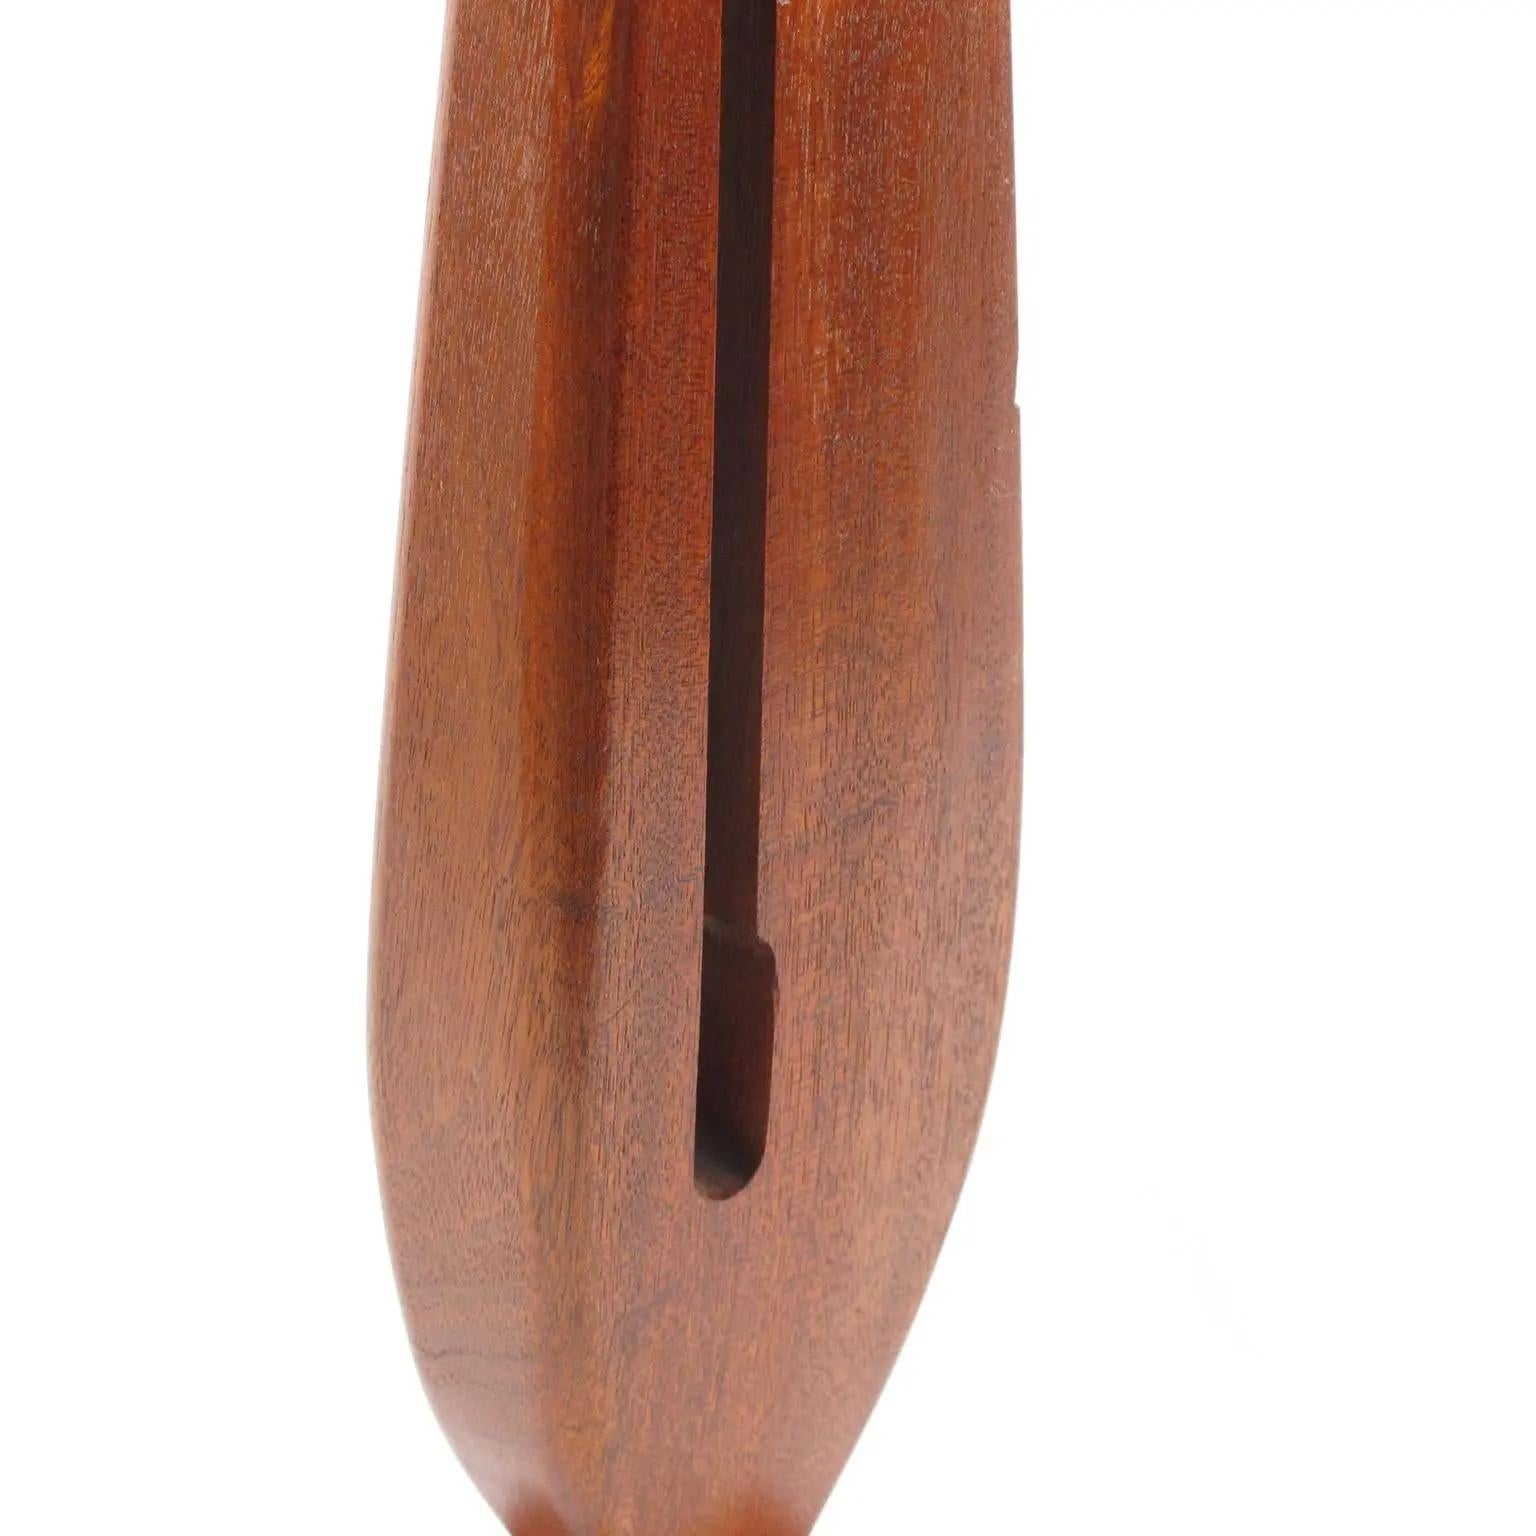 Architectural Wooden Ornament Sculpture Tuning Fork For Sale 1